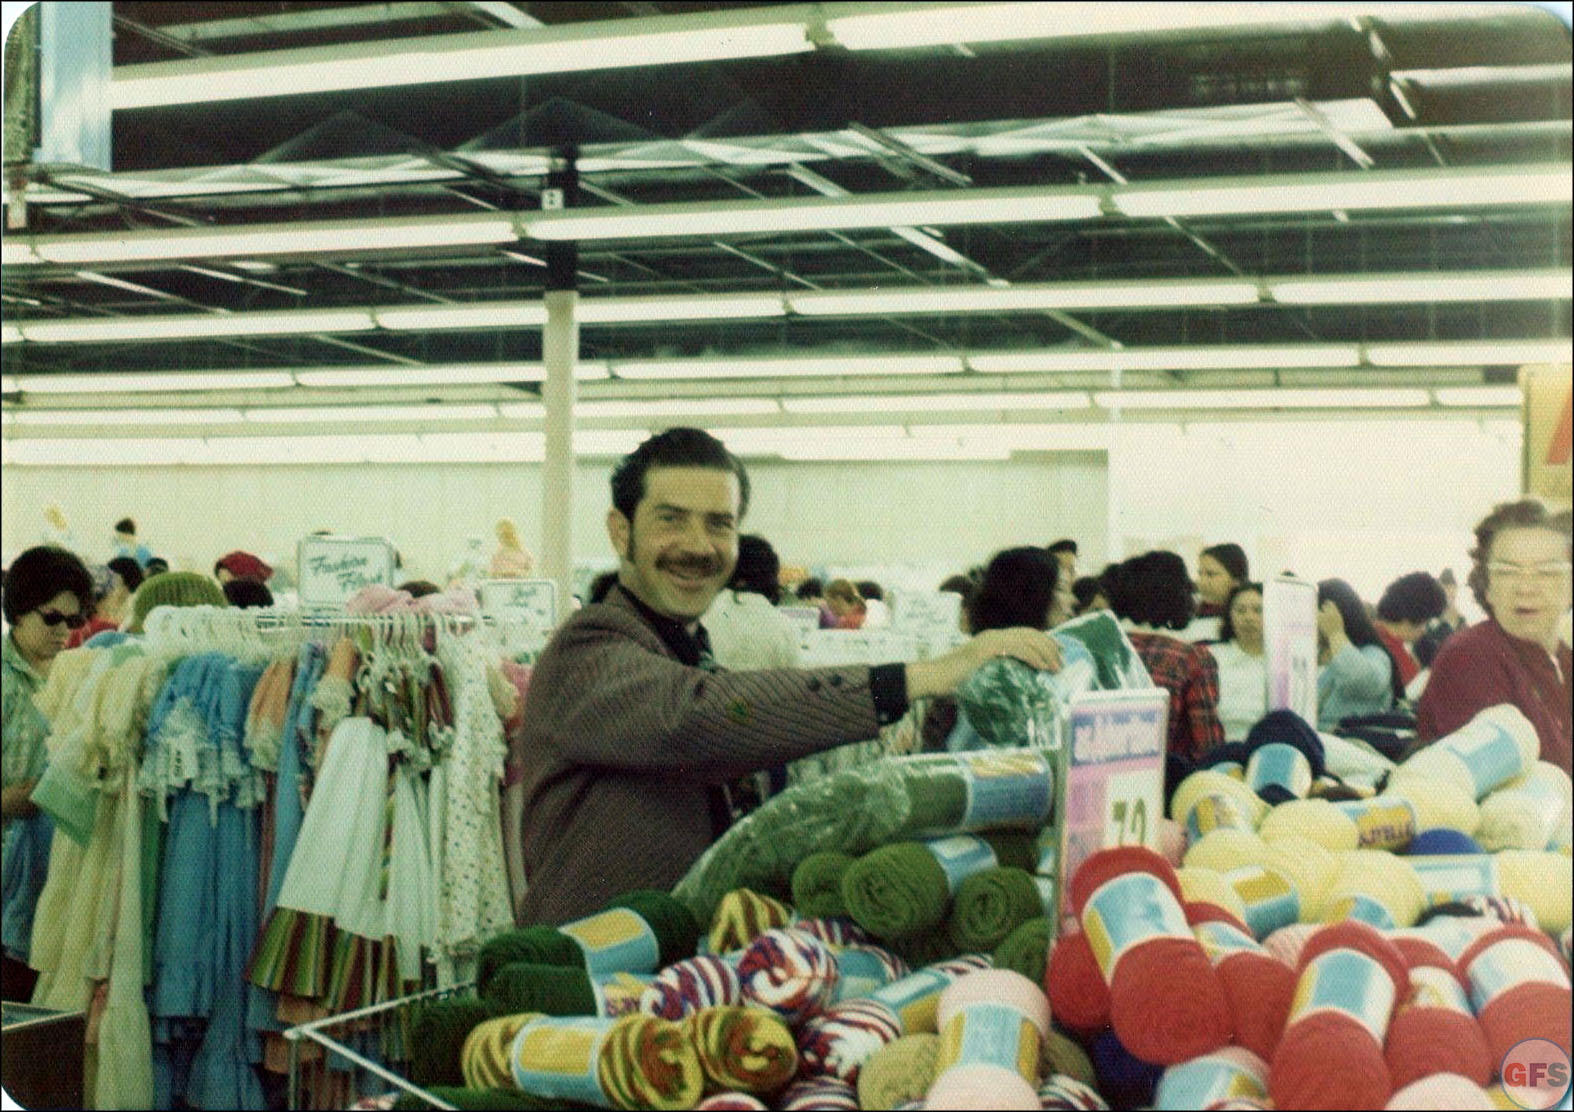 Found photograph of a Kmart in the 1970s